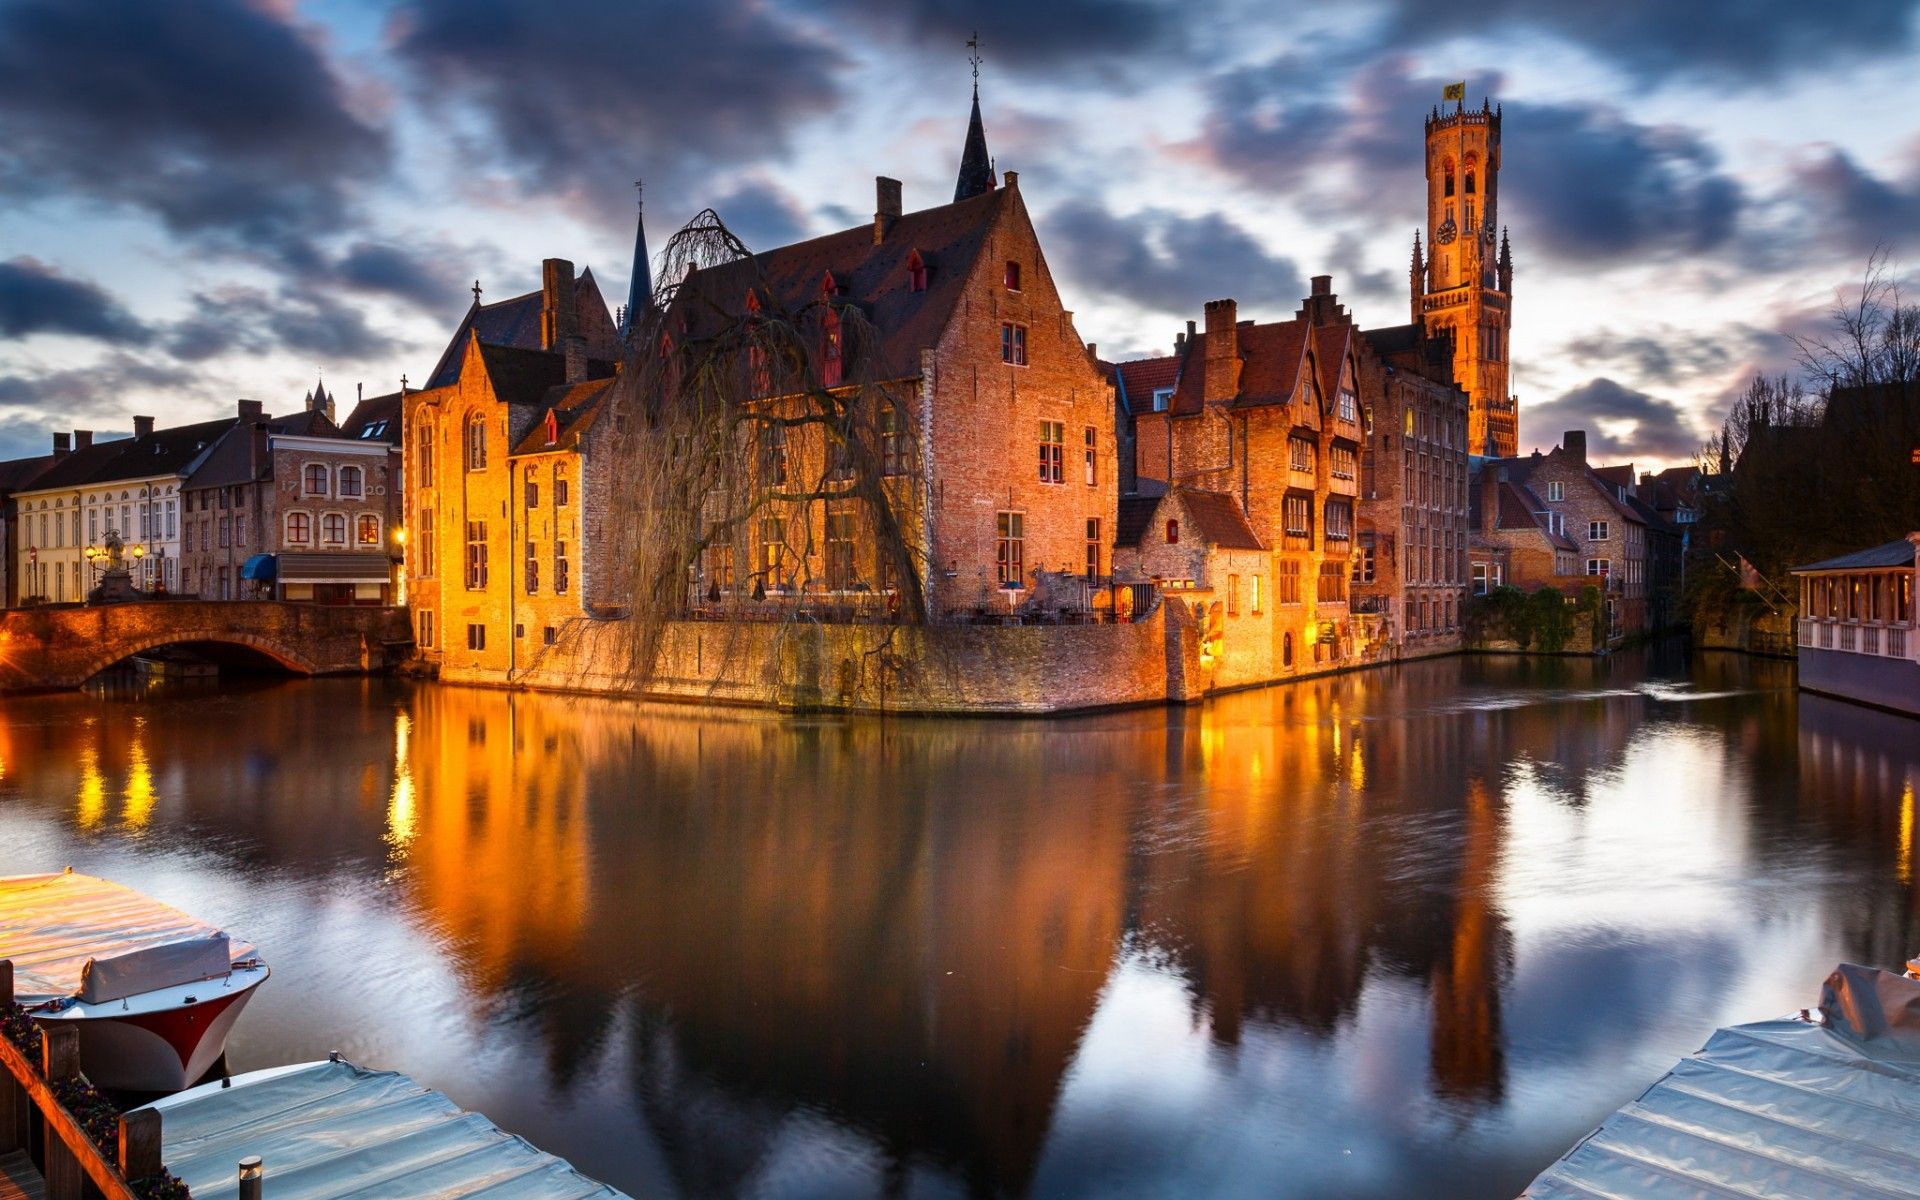 Houses near the river in the city of Bruges, Belgium wallpaper and image, picture, photo